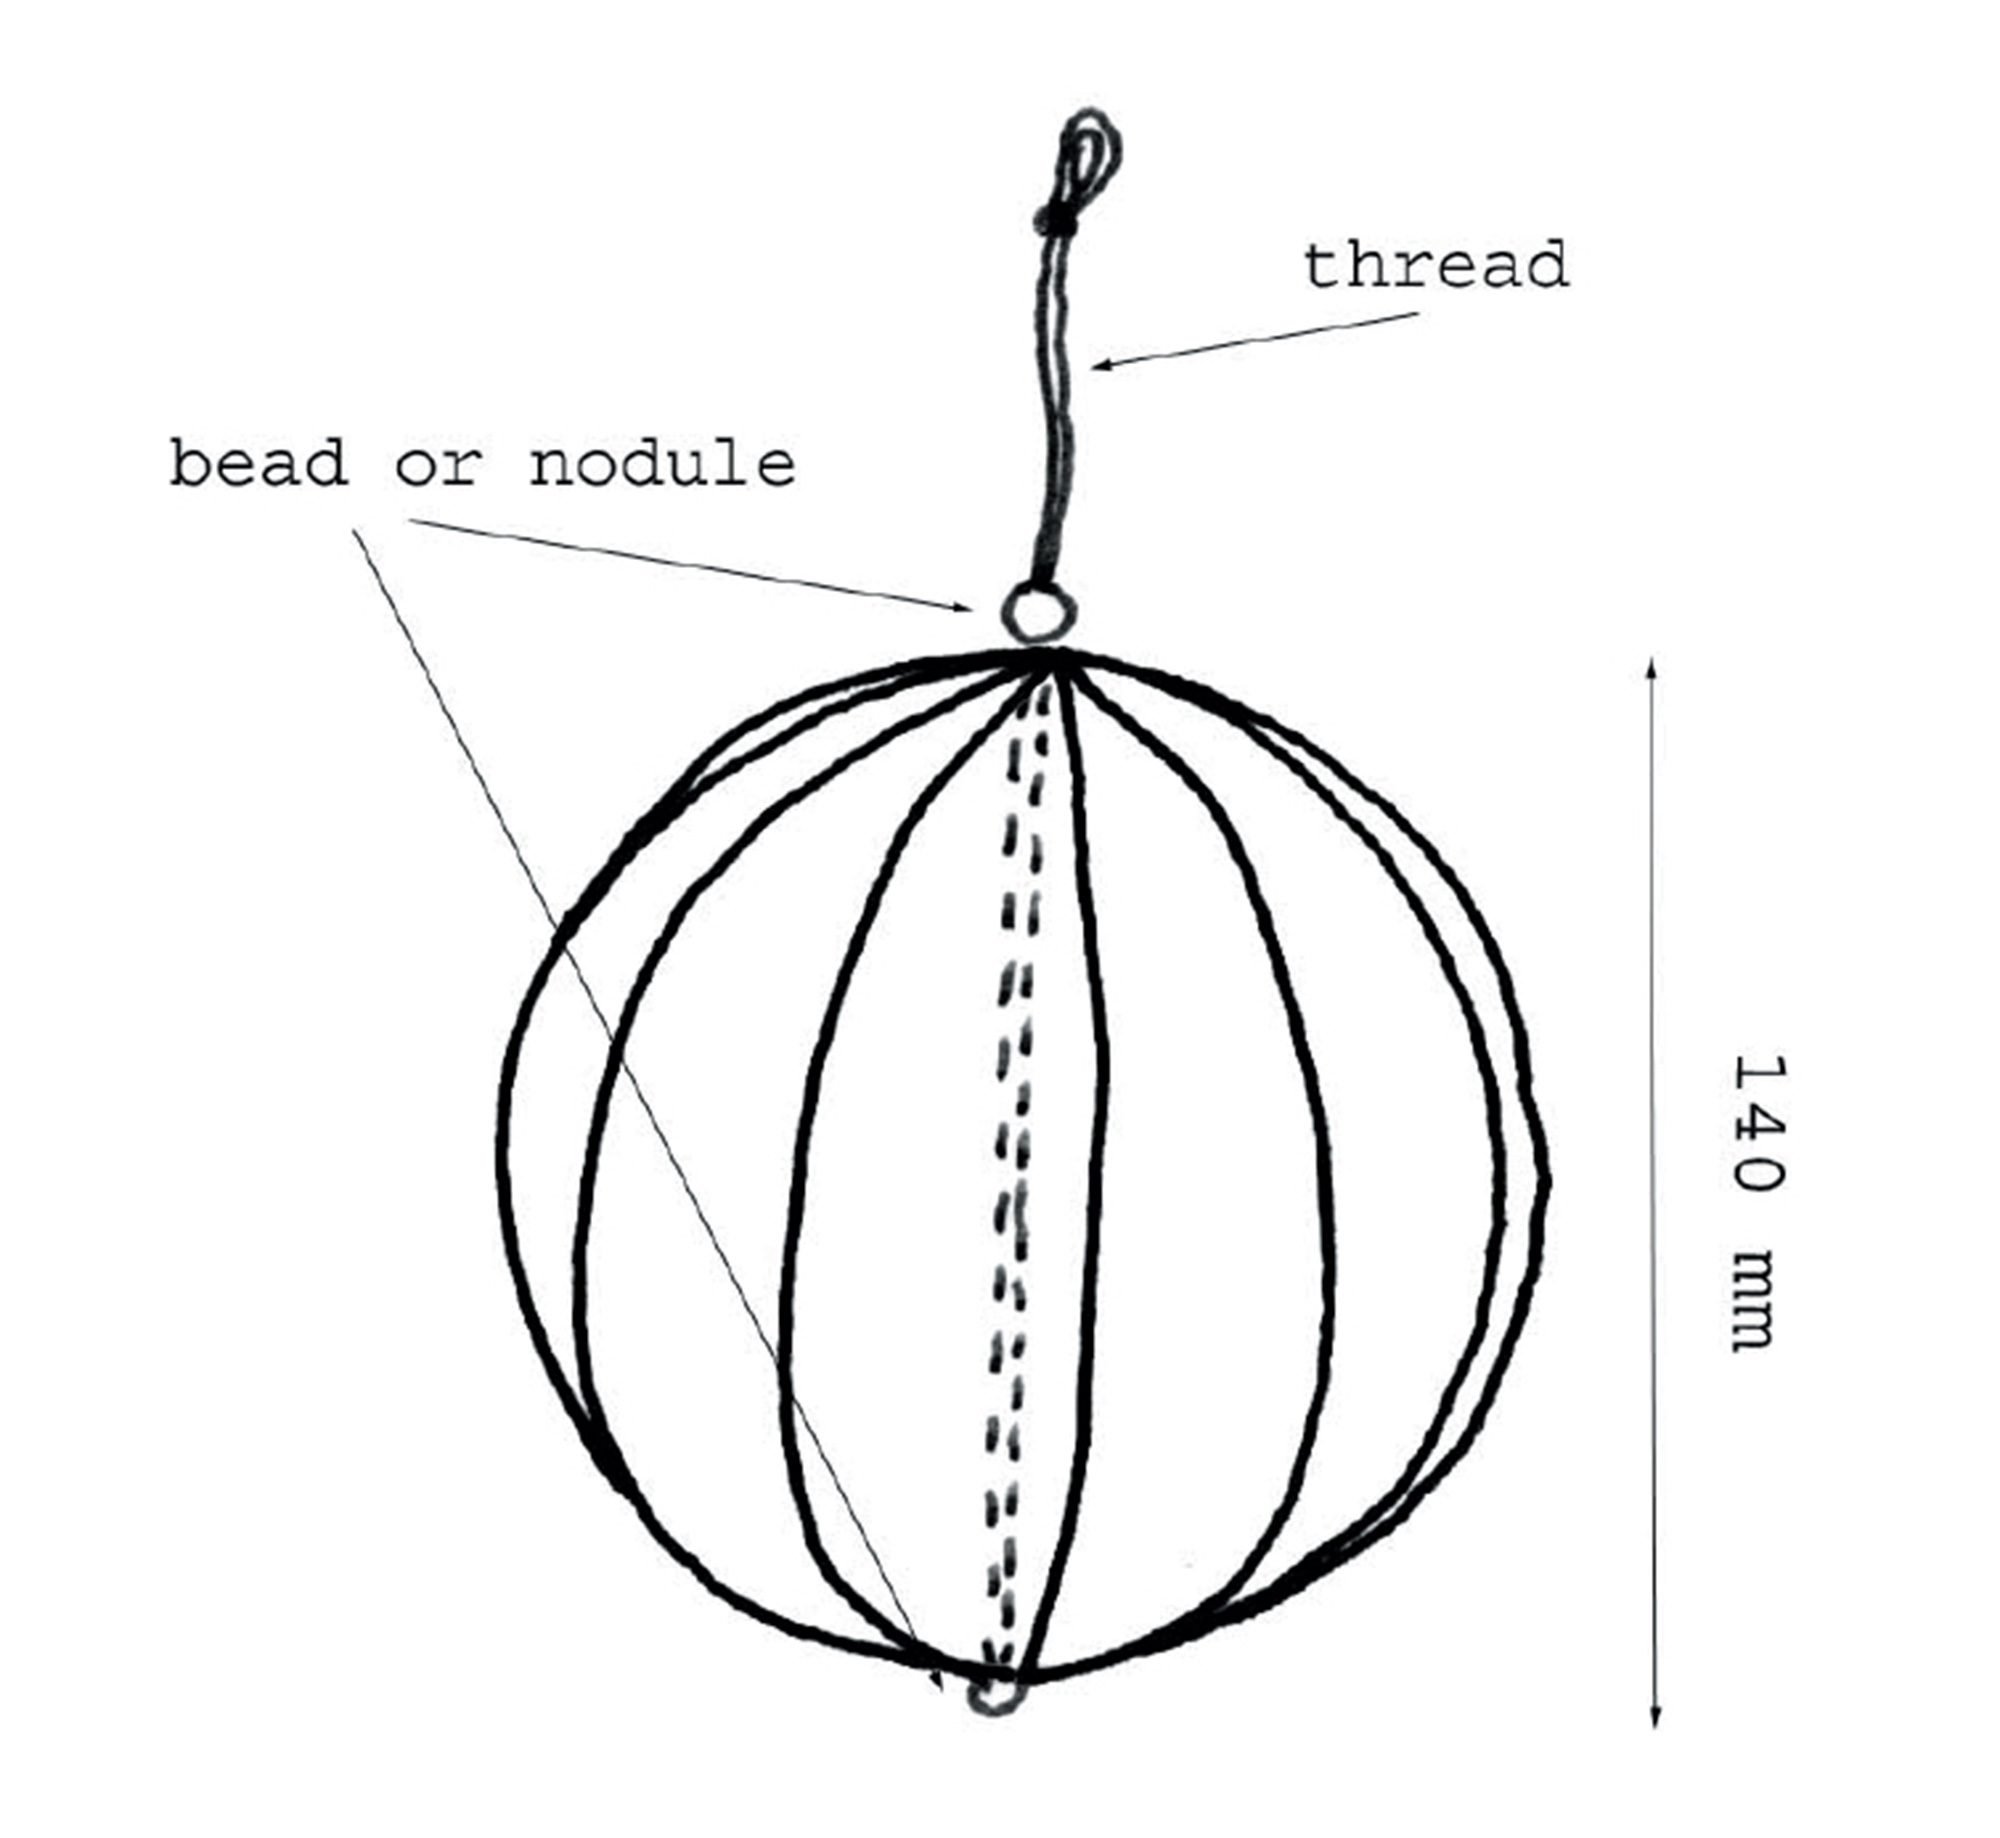 A sketch by artist Vadim Fishkin of a paper globe with its parts labeled and dimensions listed.